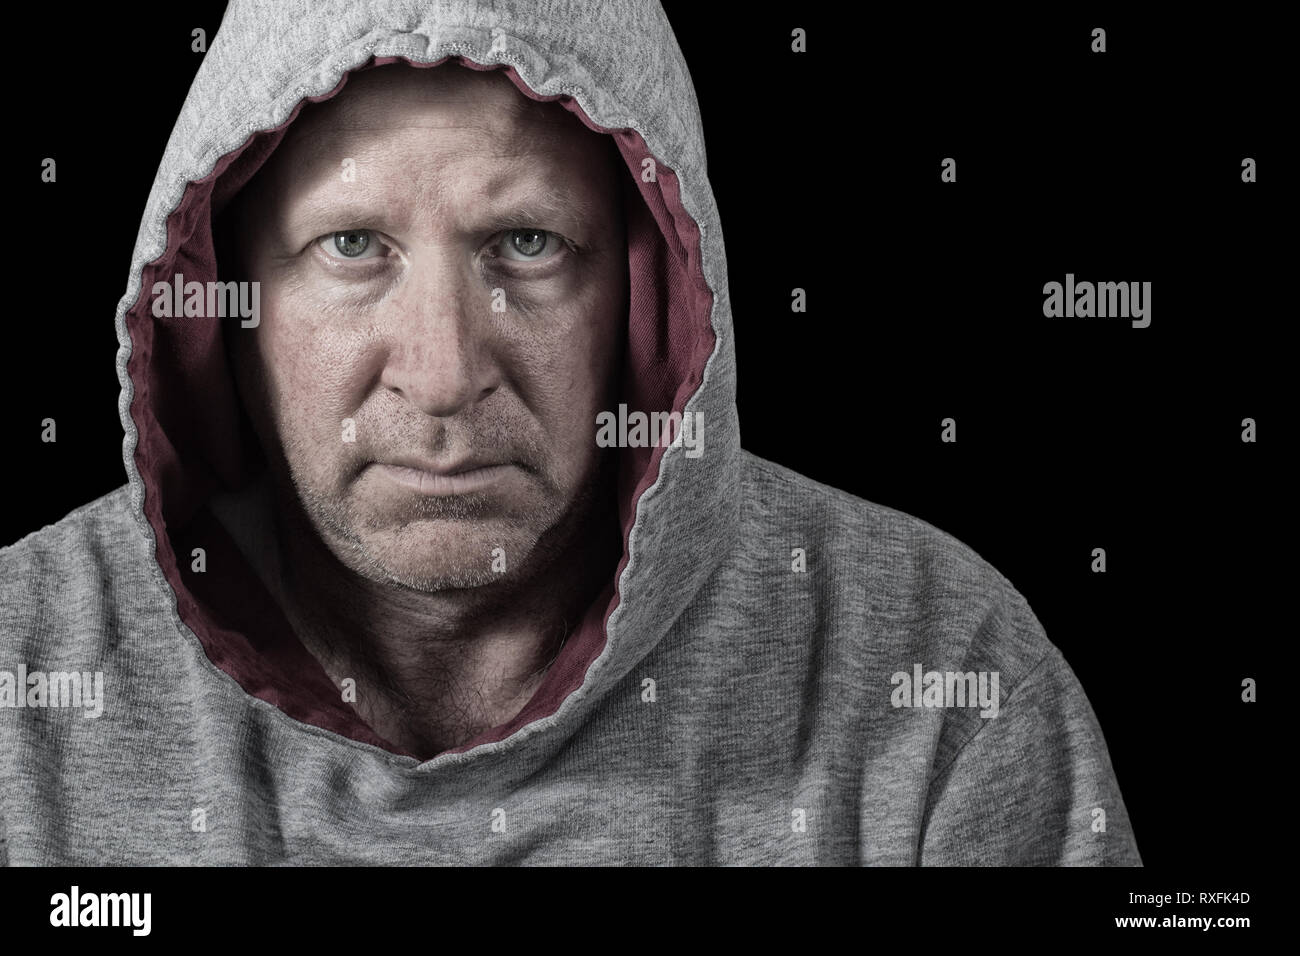 Unhappy and perhaps angry man in hoodie. Isolated on black. Stock Photo